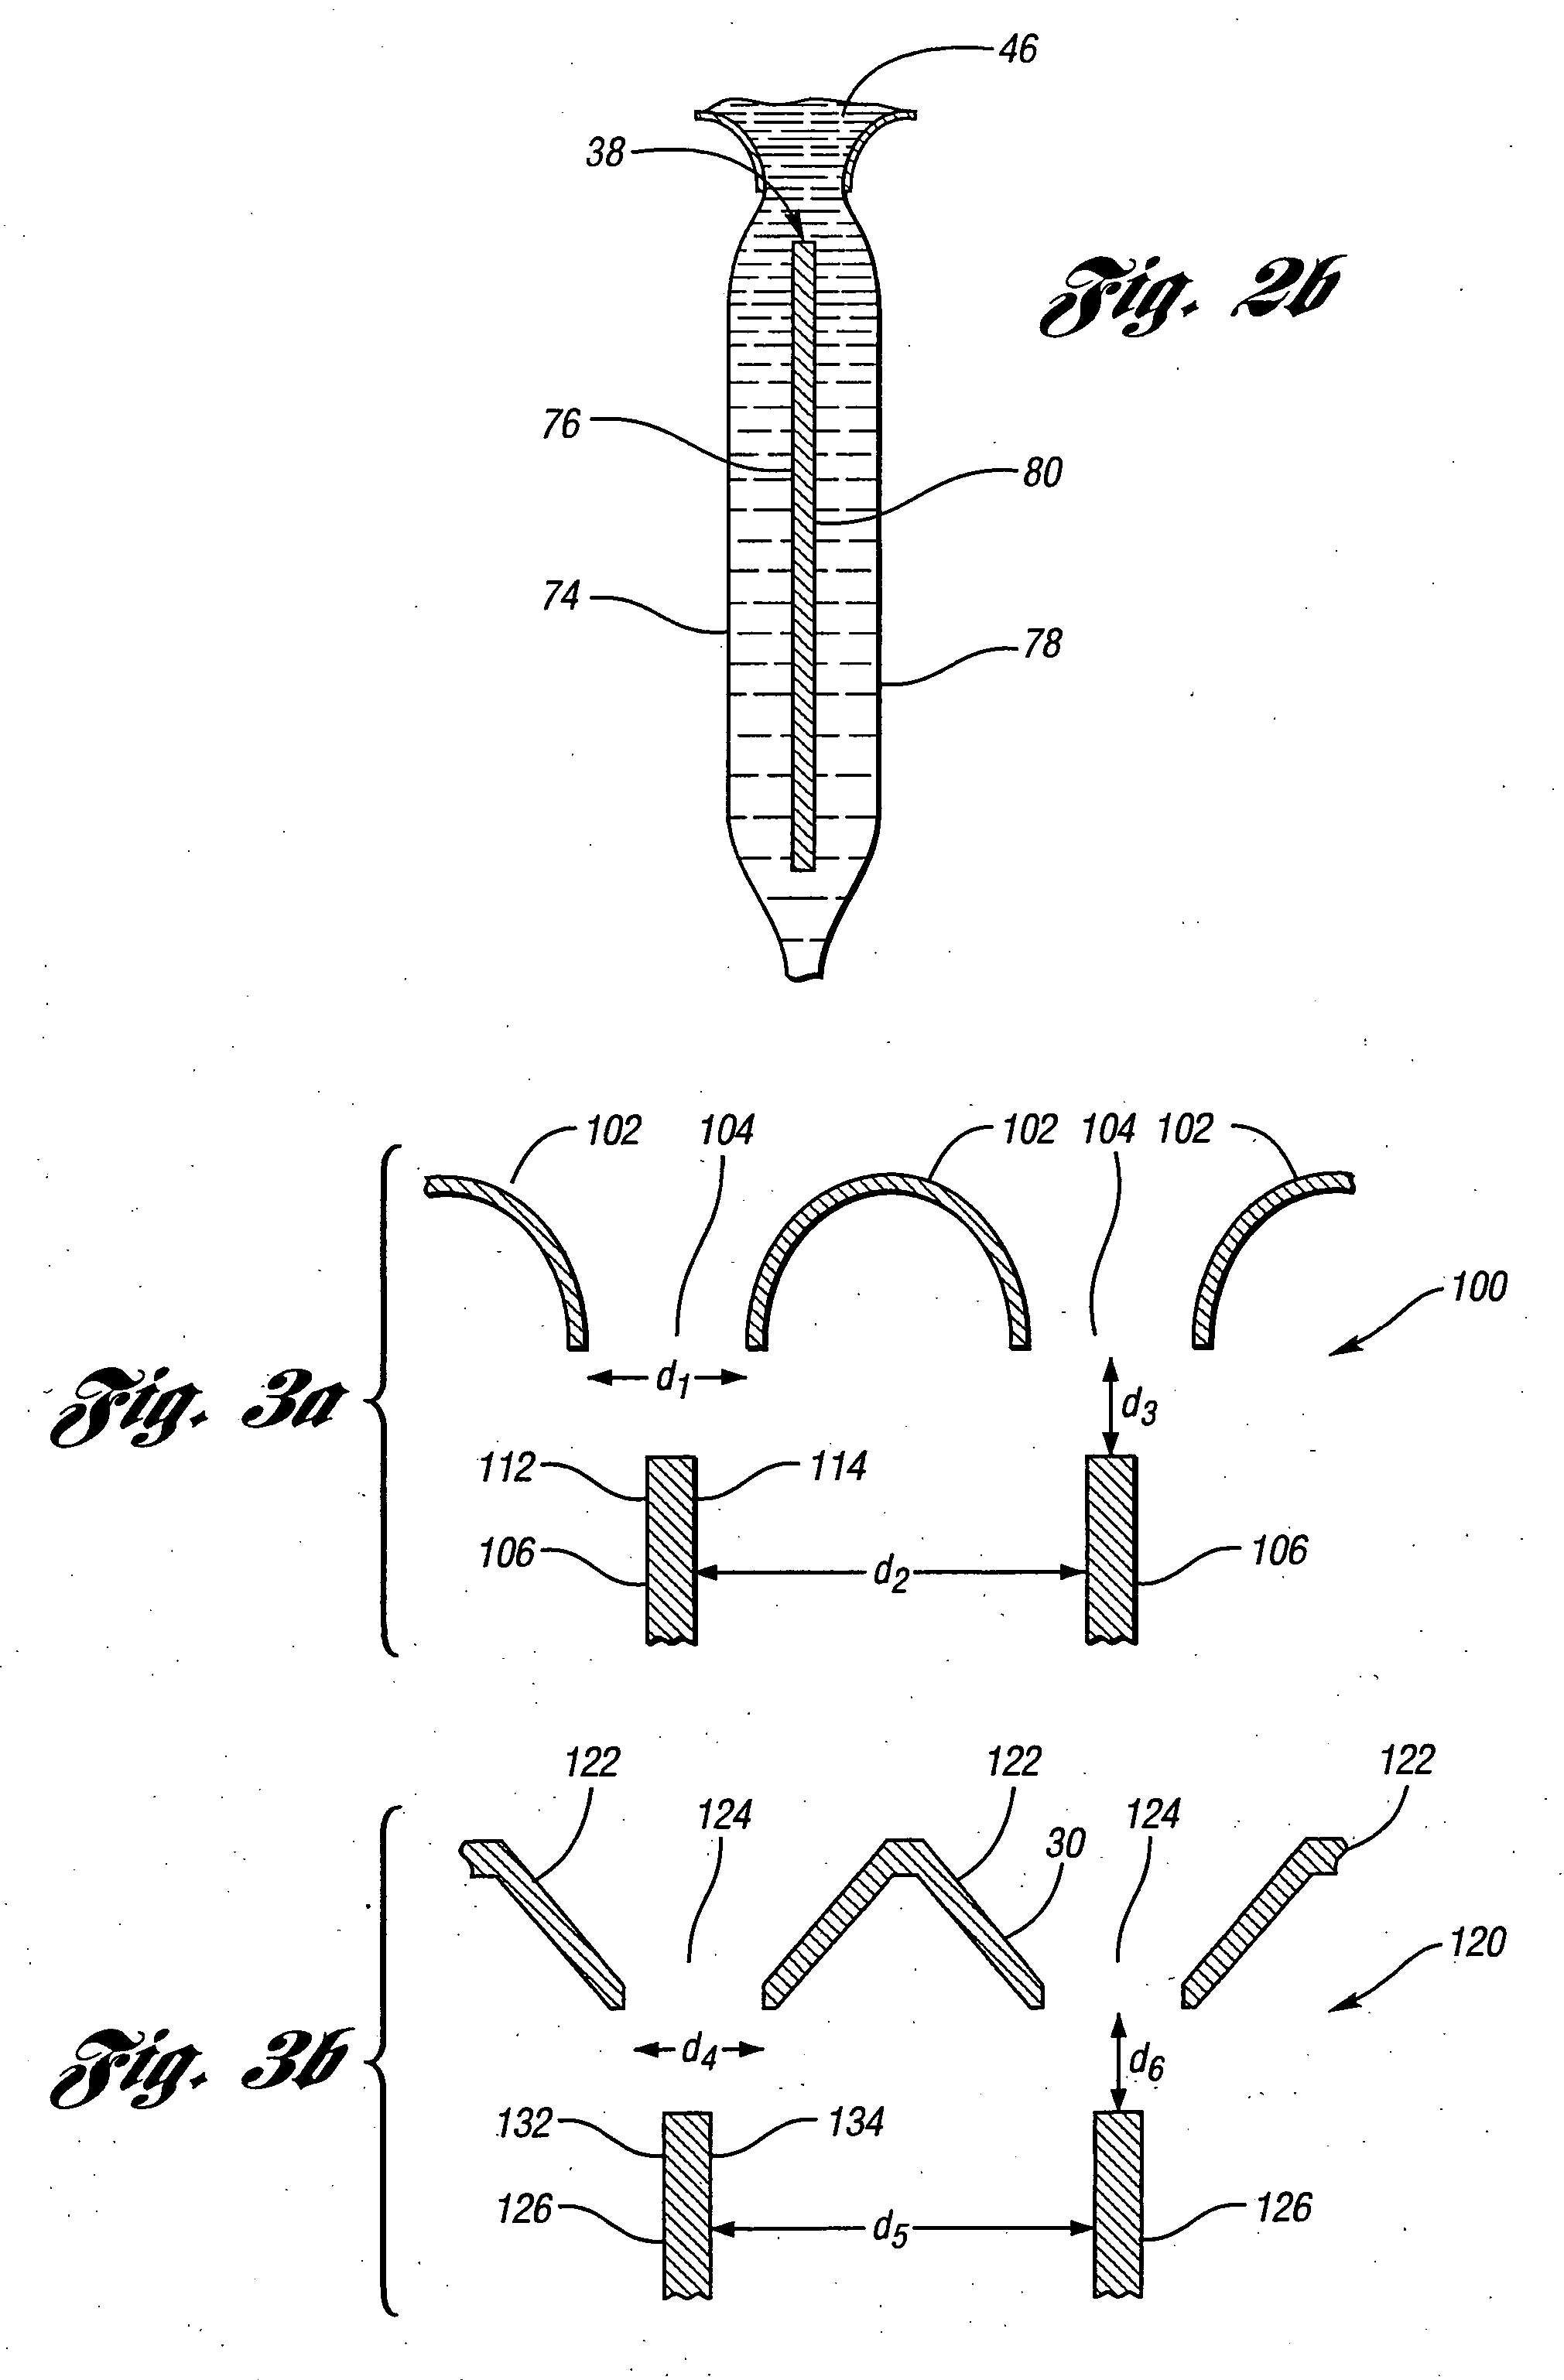 Family of stationary film generators and film support structures for vertical staged polymerization reactors